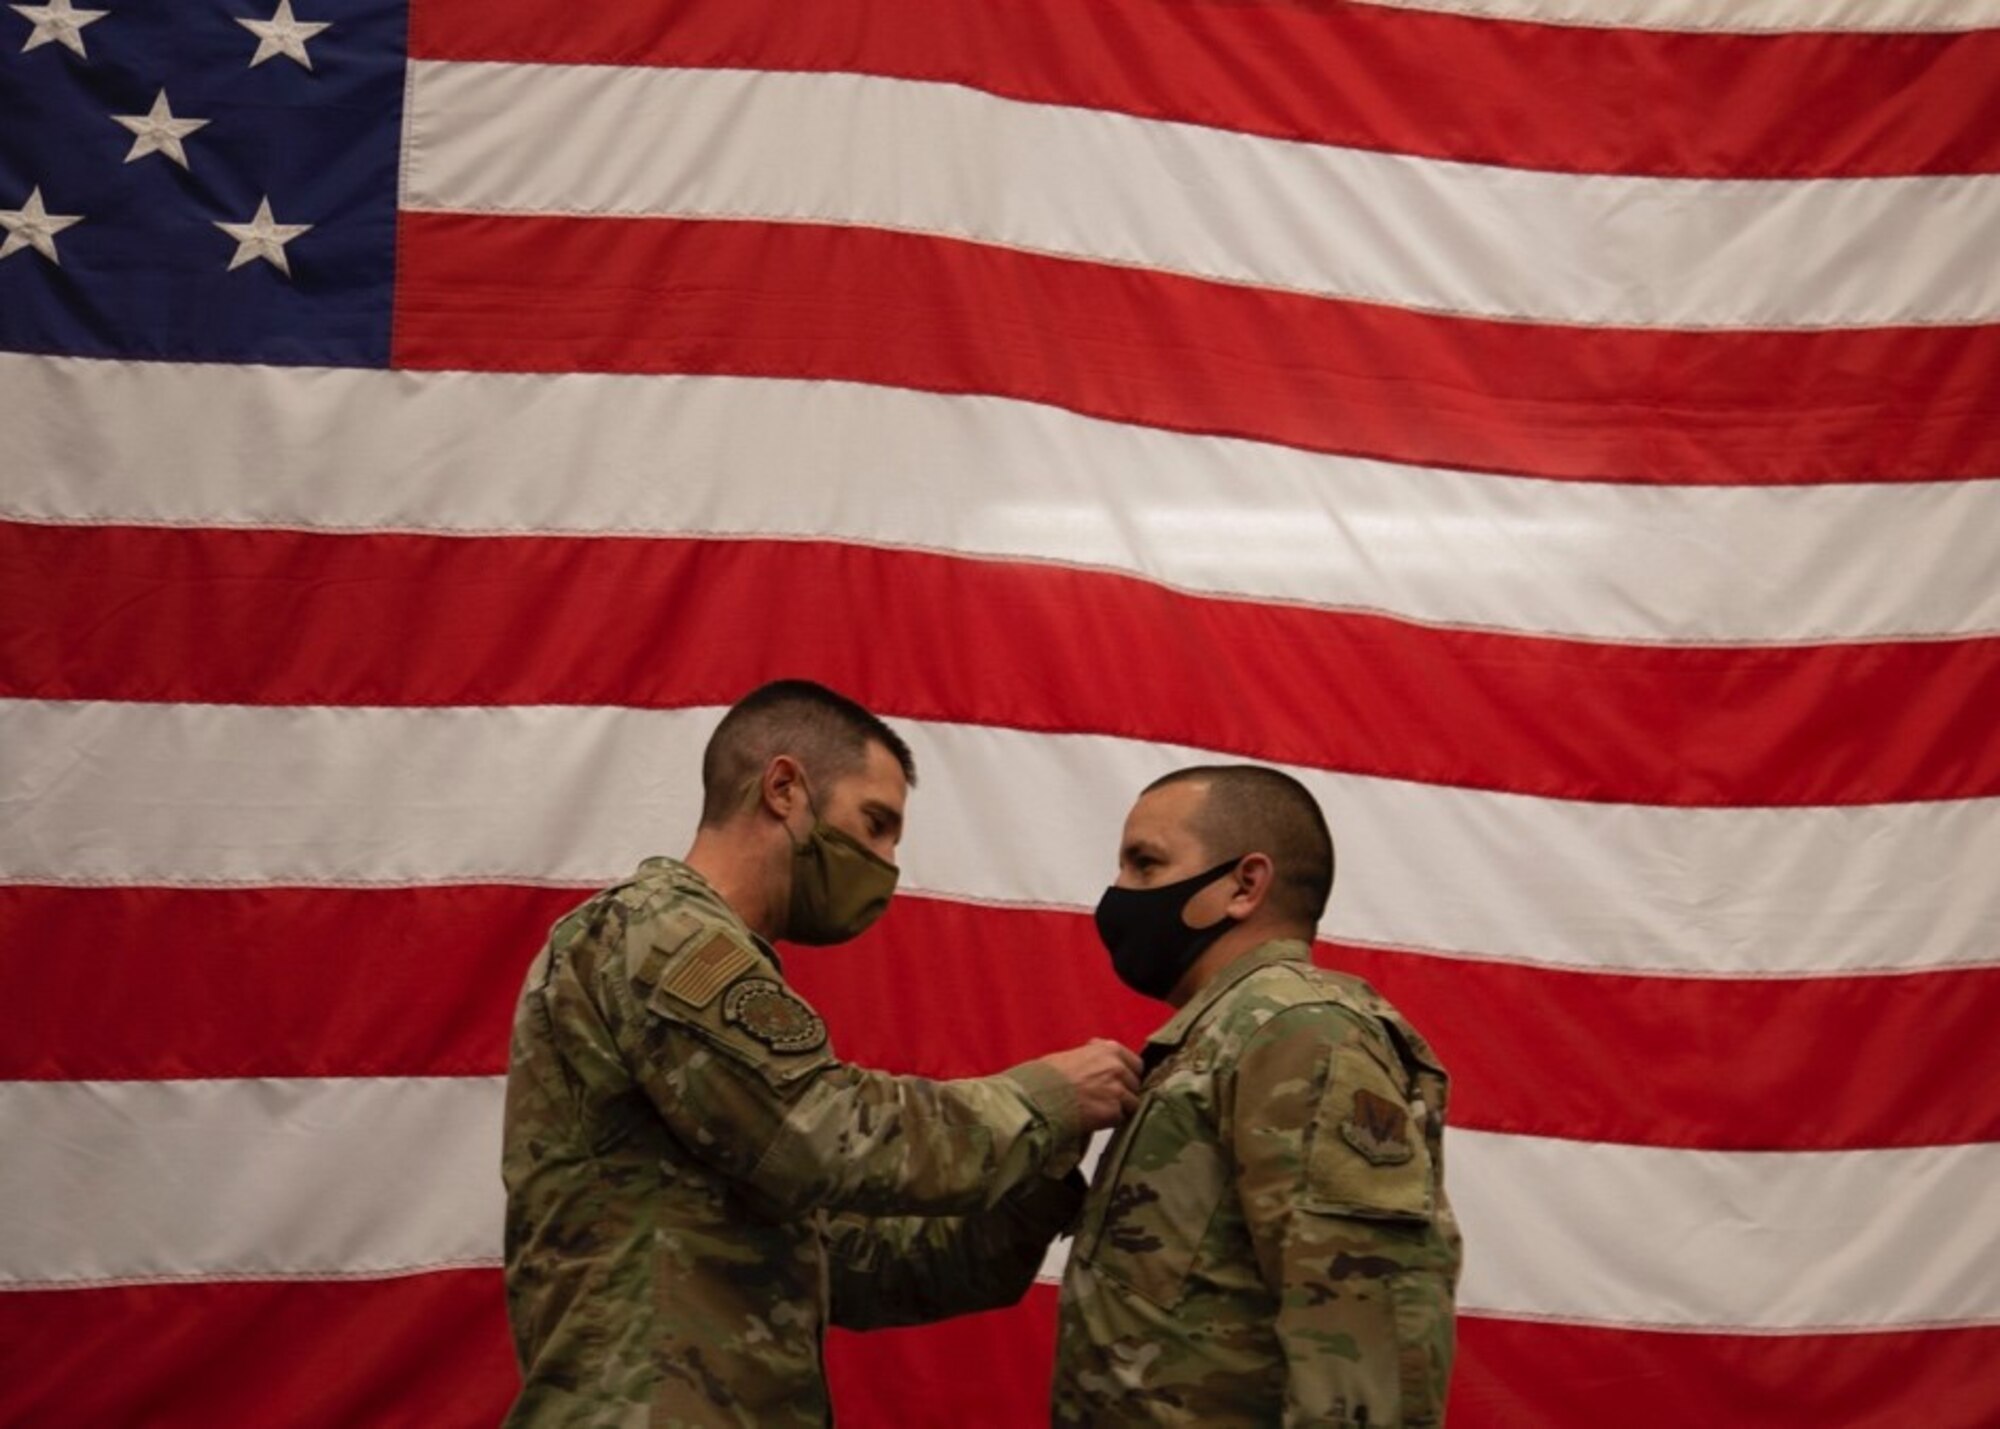 U.S. Air Force Lt. Col. Kevin Fletcher, 726th Air Control Squadron commander, pins the Bronze Star Medal onto Master Sgt. Joe Rodriguez, 726th Air Control Squadron radio frequency transmissions systems NCOIC, at Mountain Home Air Force Base, Idaho, Oct. 9, 2020. Along with the Bronze Star, Rodriquez was also awarded U.S. Army commendation medal for his participation in Operation Inherent Resolve. (U.S. Air Force Photo by Airman 1st Class Eric Brown)